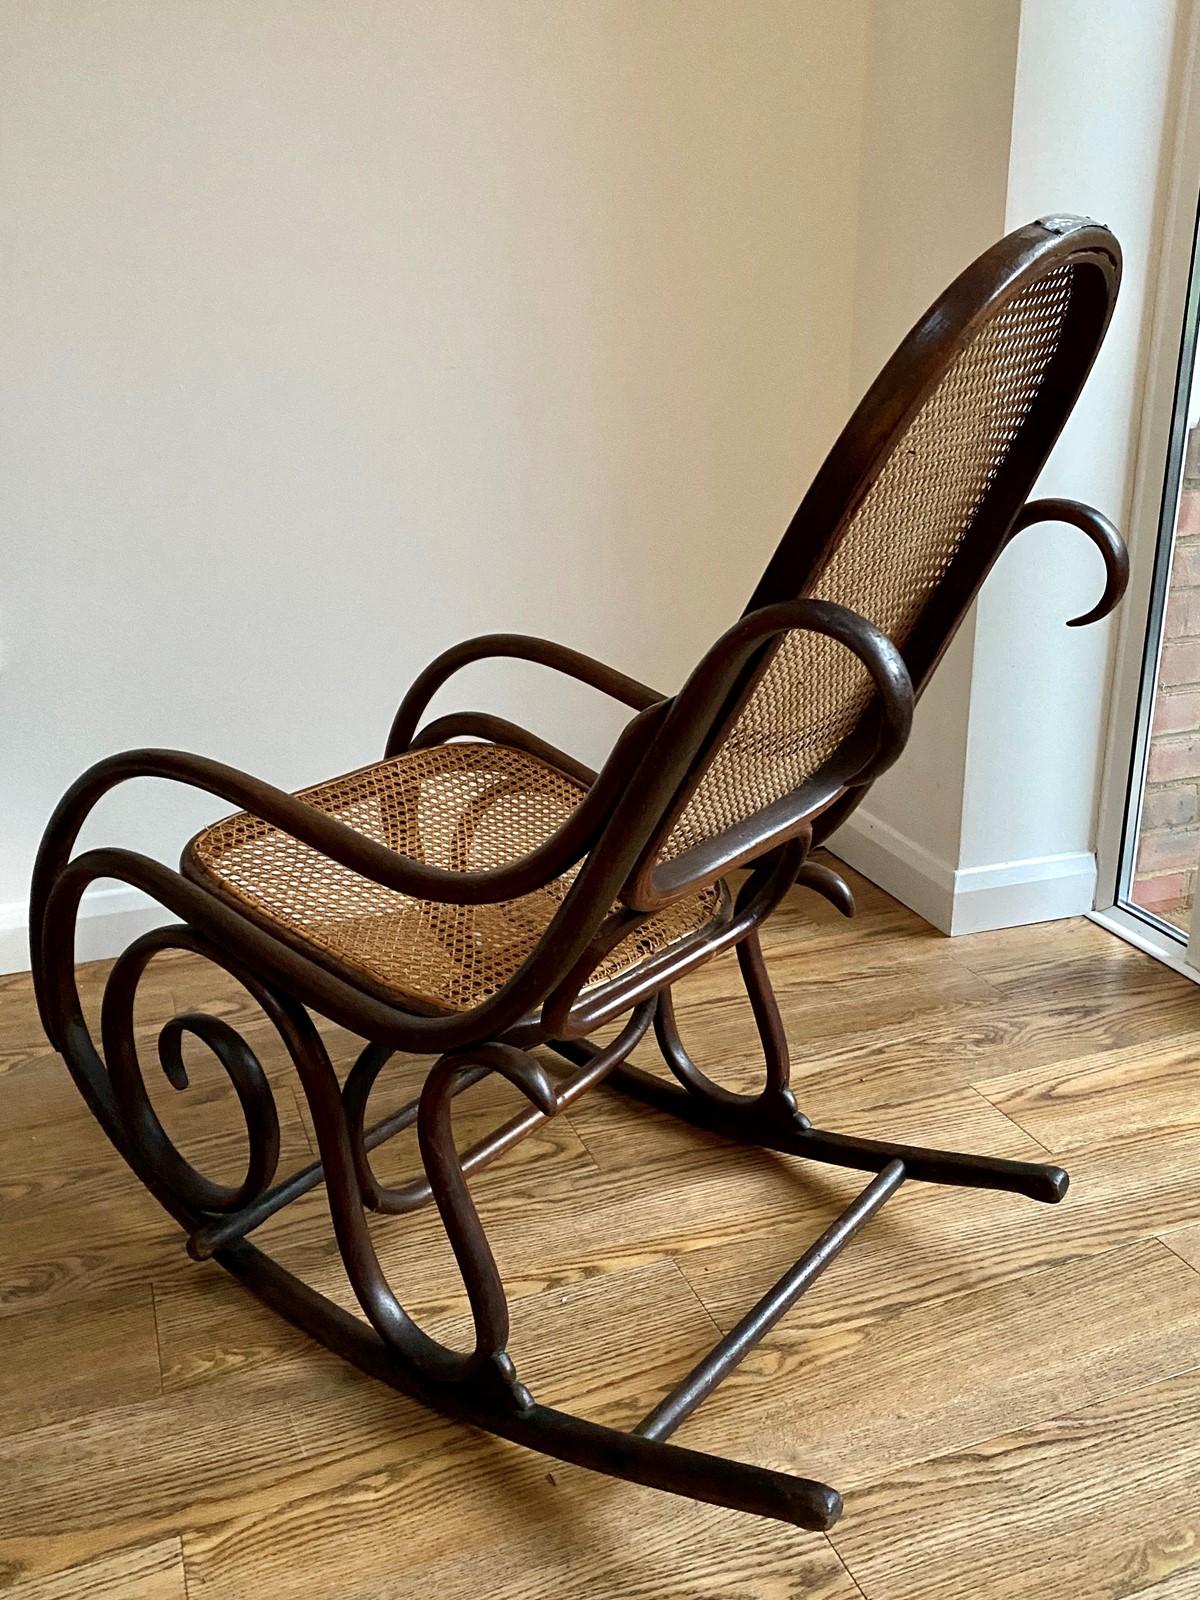 A bentwood and cane rocking chair by Thonet. Having the Thonet trademark beautiful flowing organic form. The cane is in good condition and solid. The chair has good color and wear is consistent with its age and use. Having an engraved plaque to the